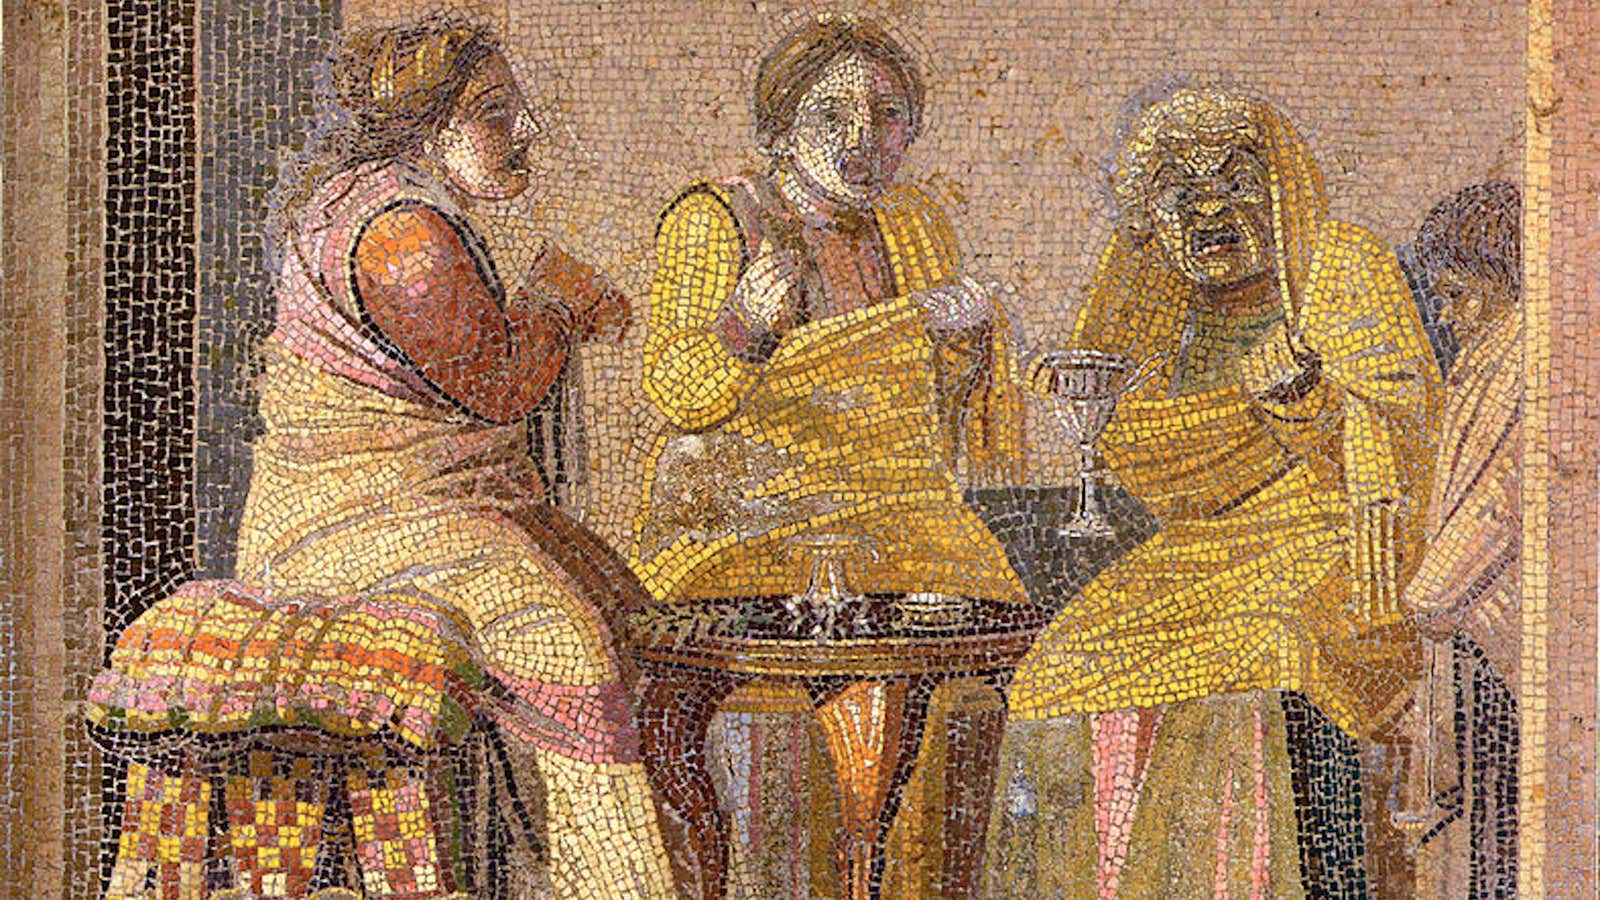 Women in Ancient Rome probably co-ruminating.